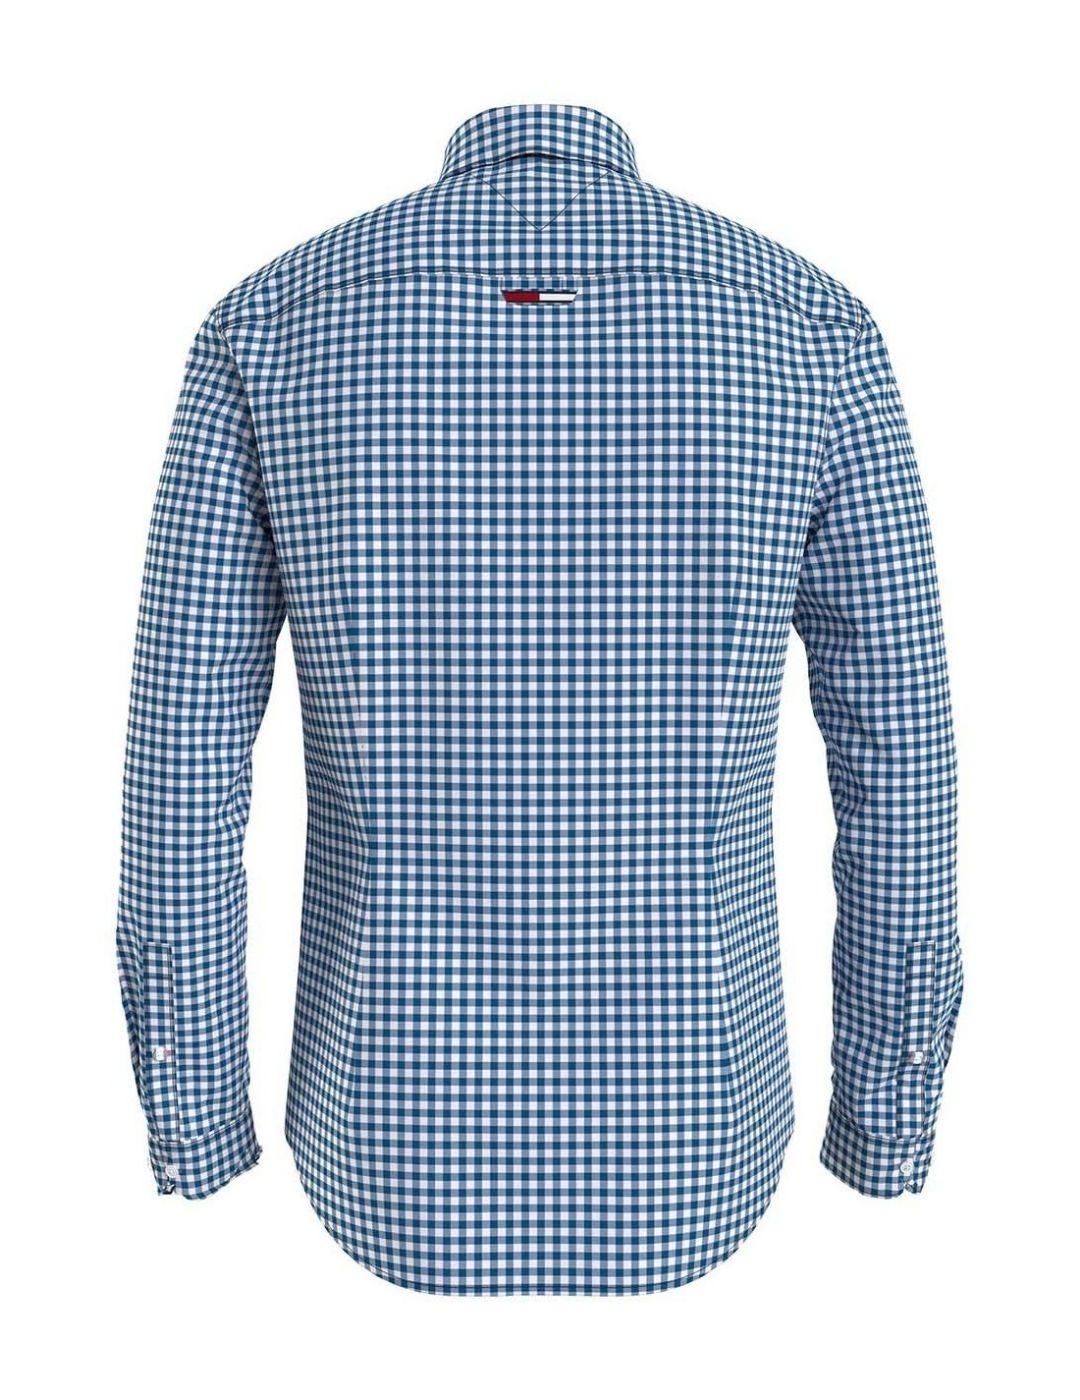 Camisa Tommy Jeans gingham azul para hombre